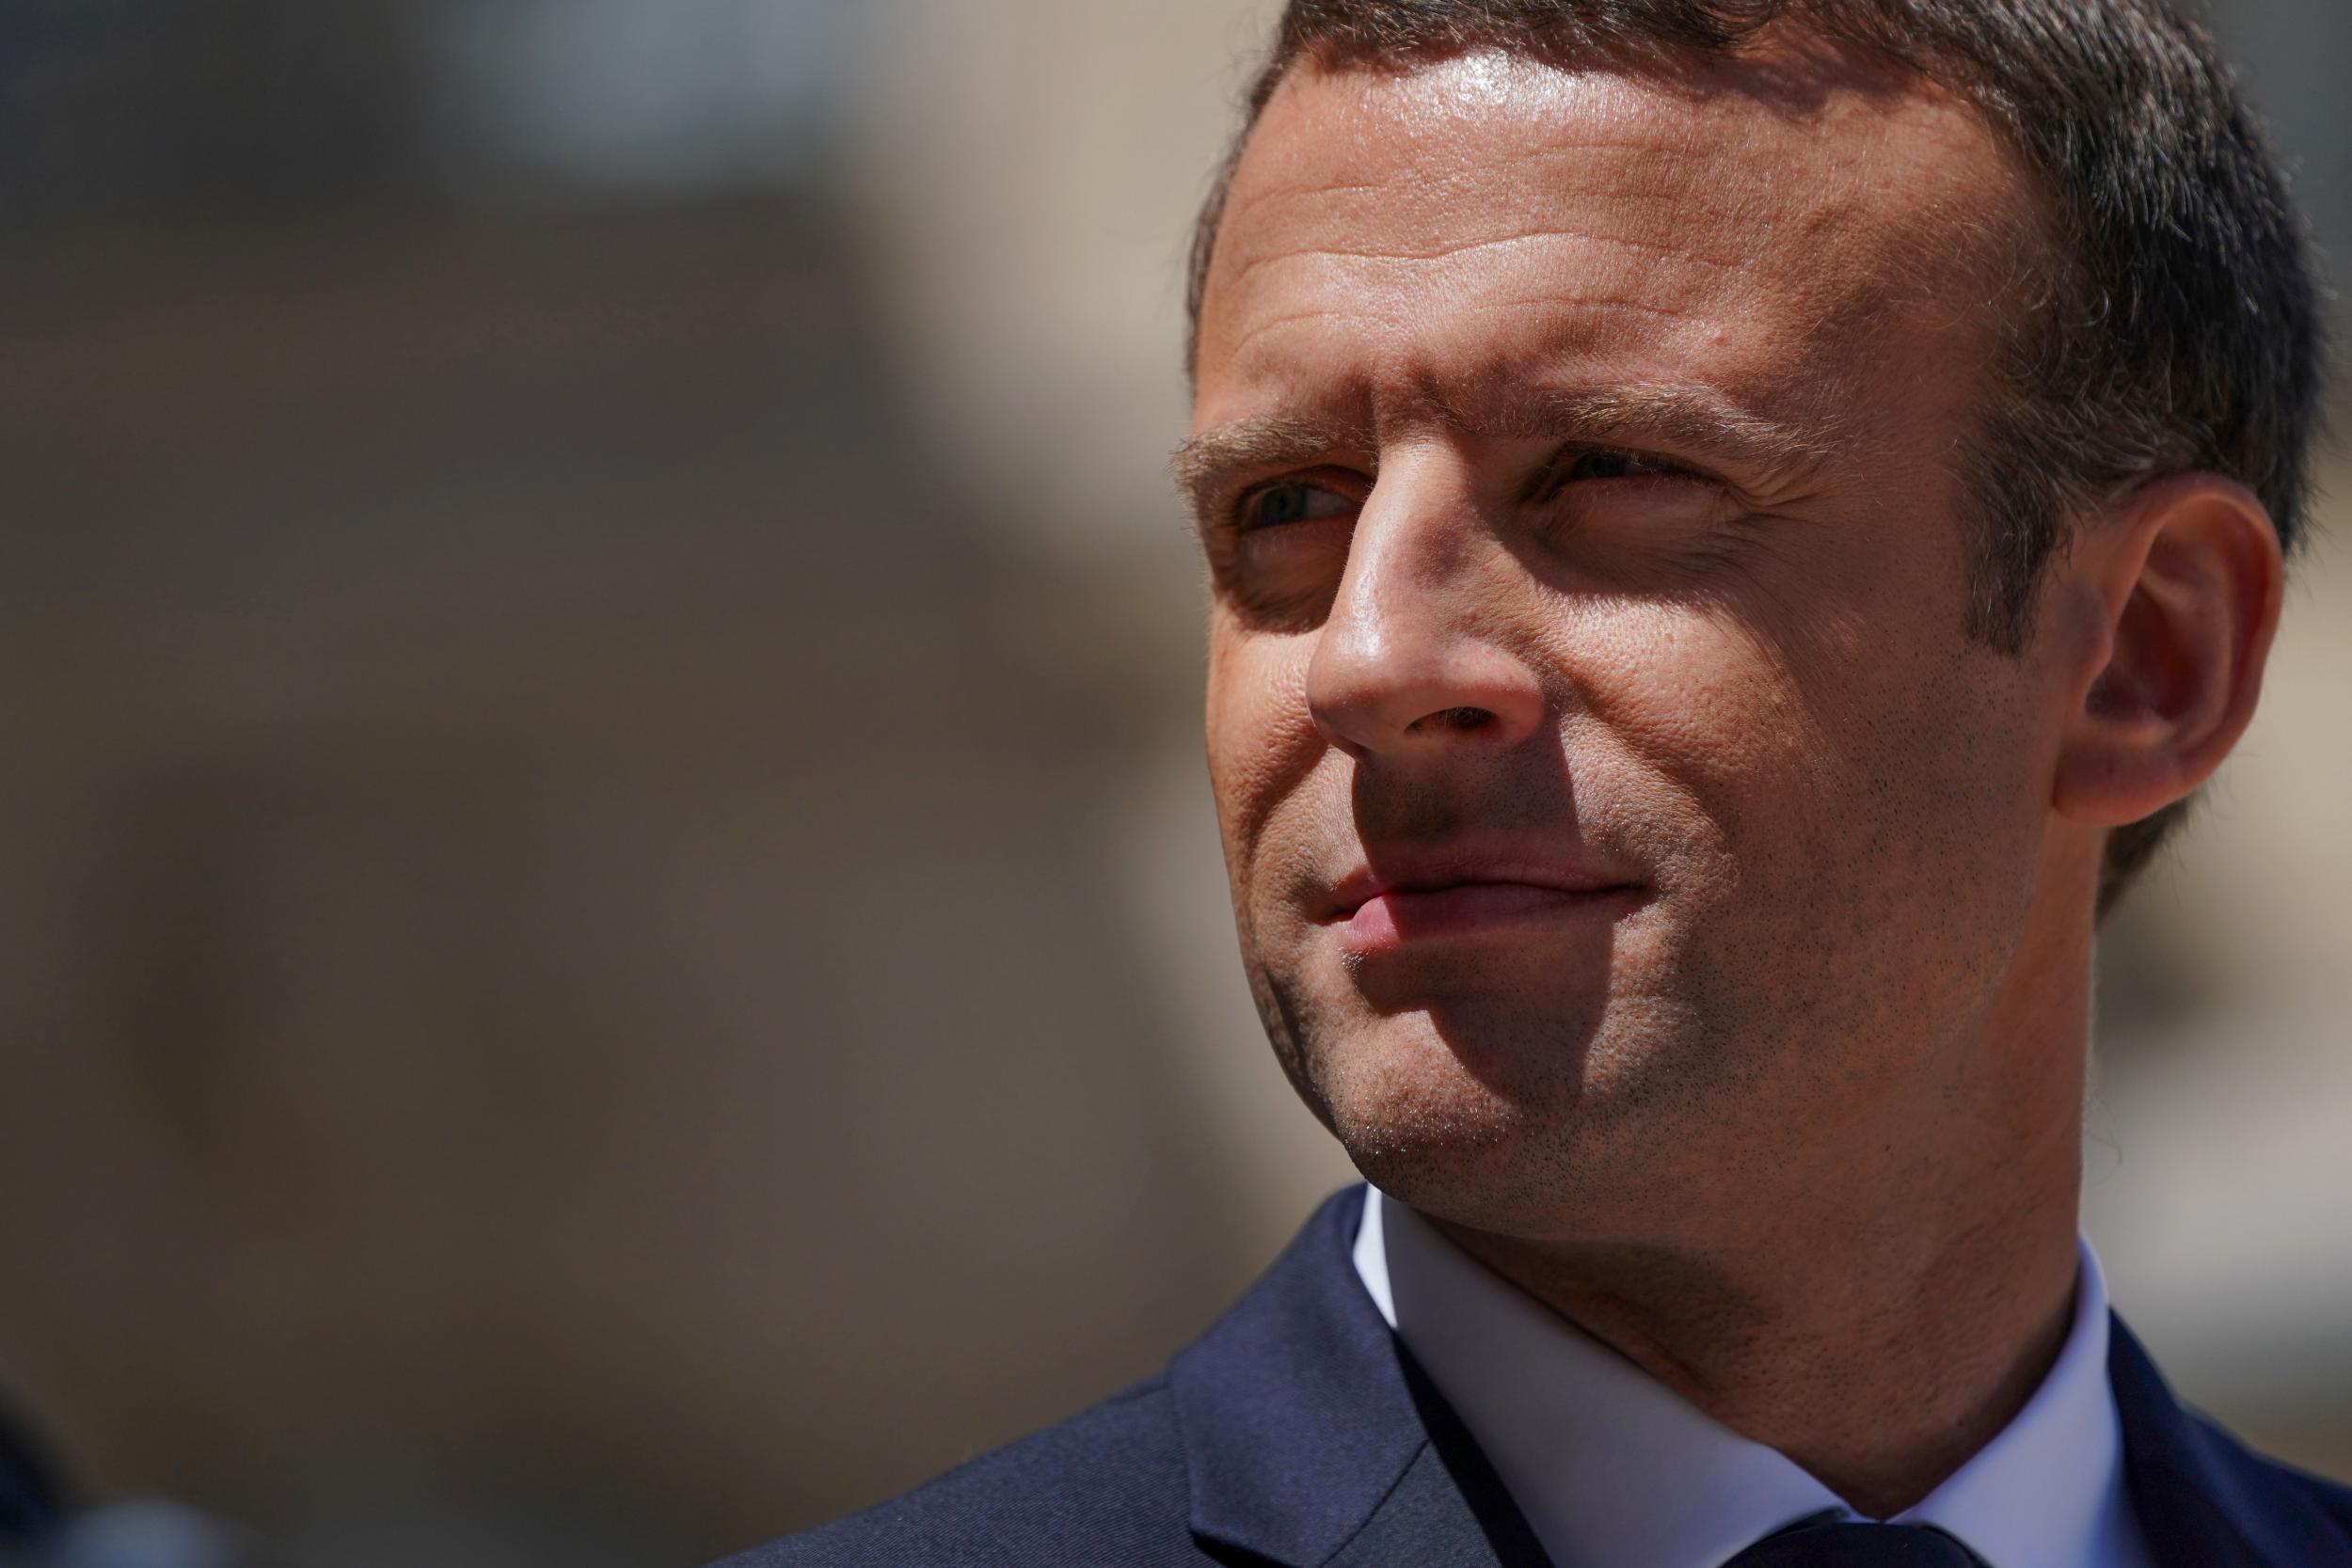 French police foiled a far-right extremist's plot to kill President Emmanuel Macron